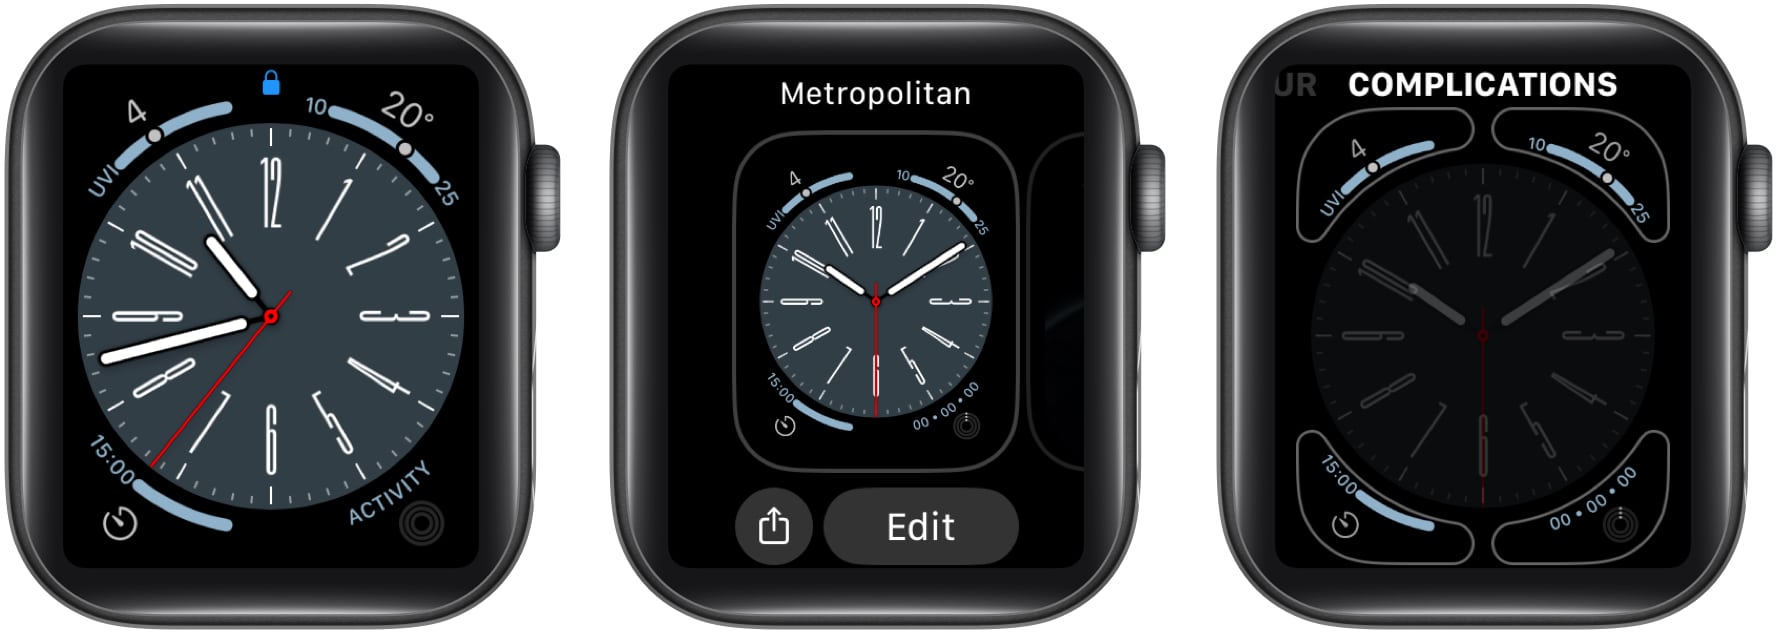 Touch and hold the watch face, touch Edit, swipe to Complications